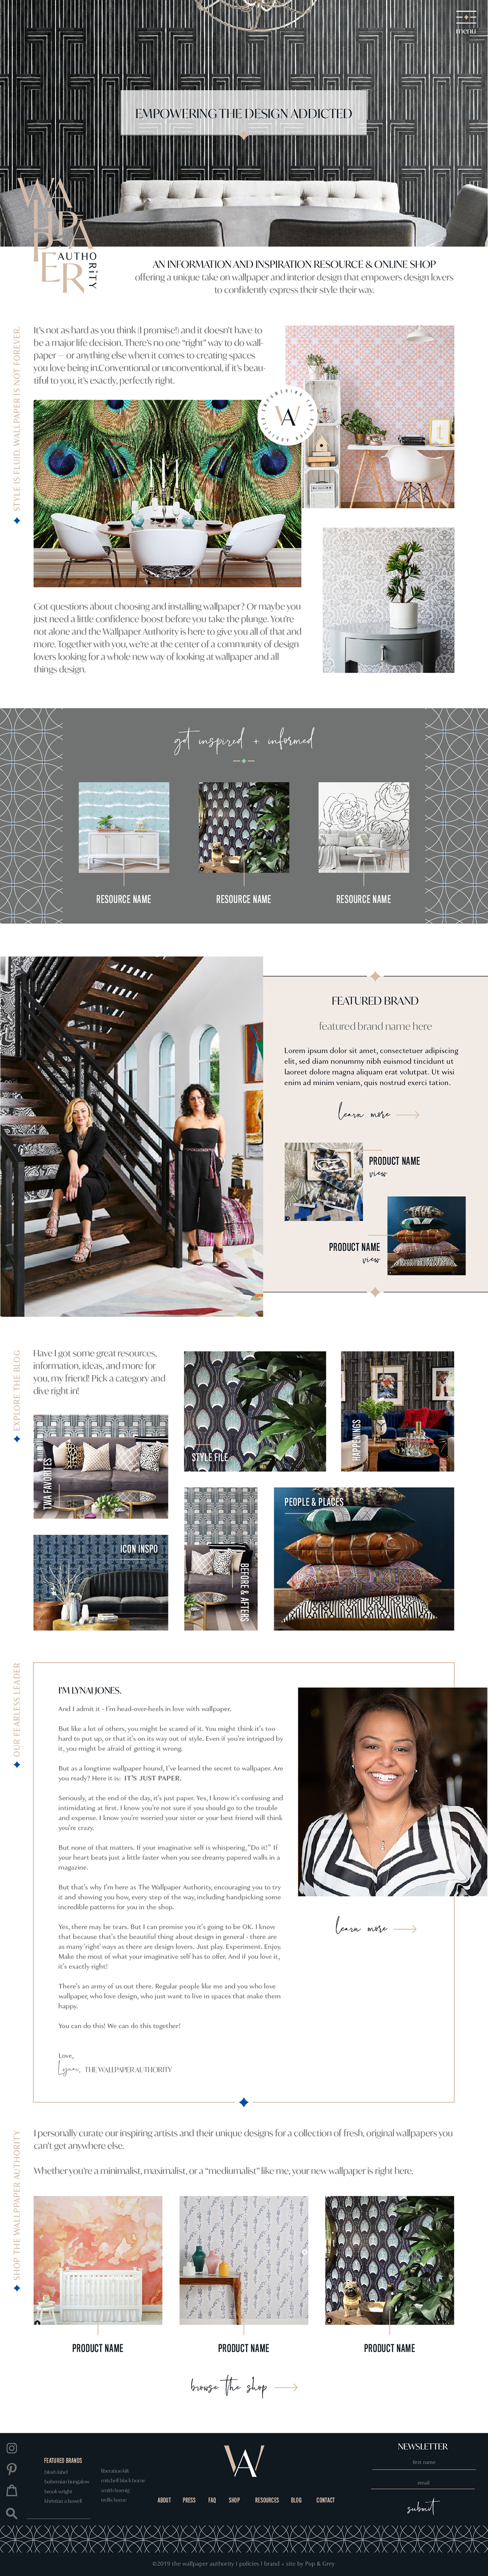 the wallpaper authority by lynai jones of mitchell black. e-commerce website and brand design by pop & grey